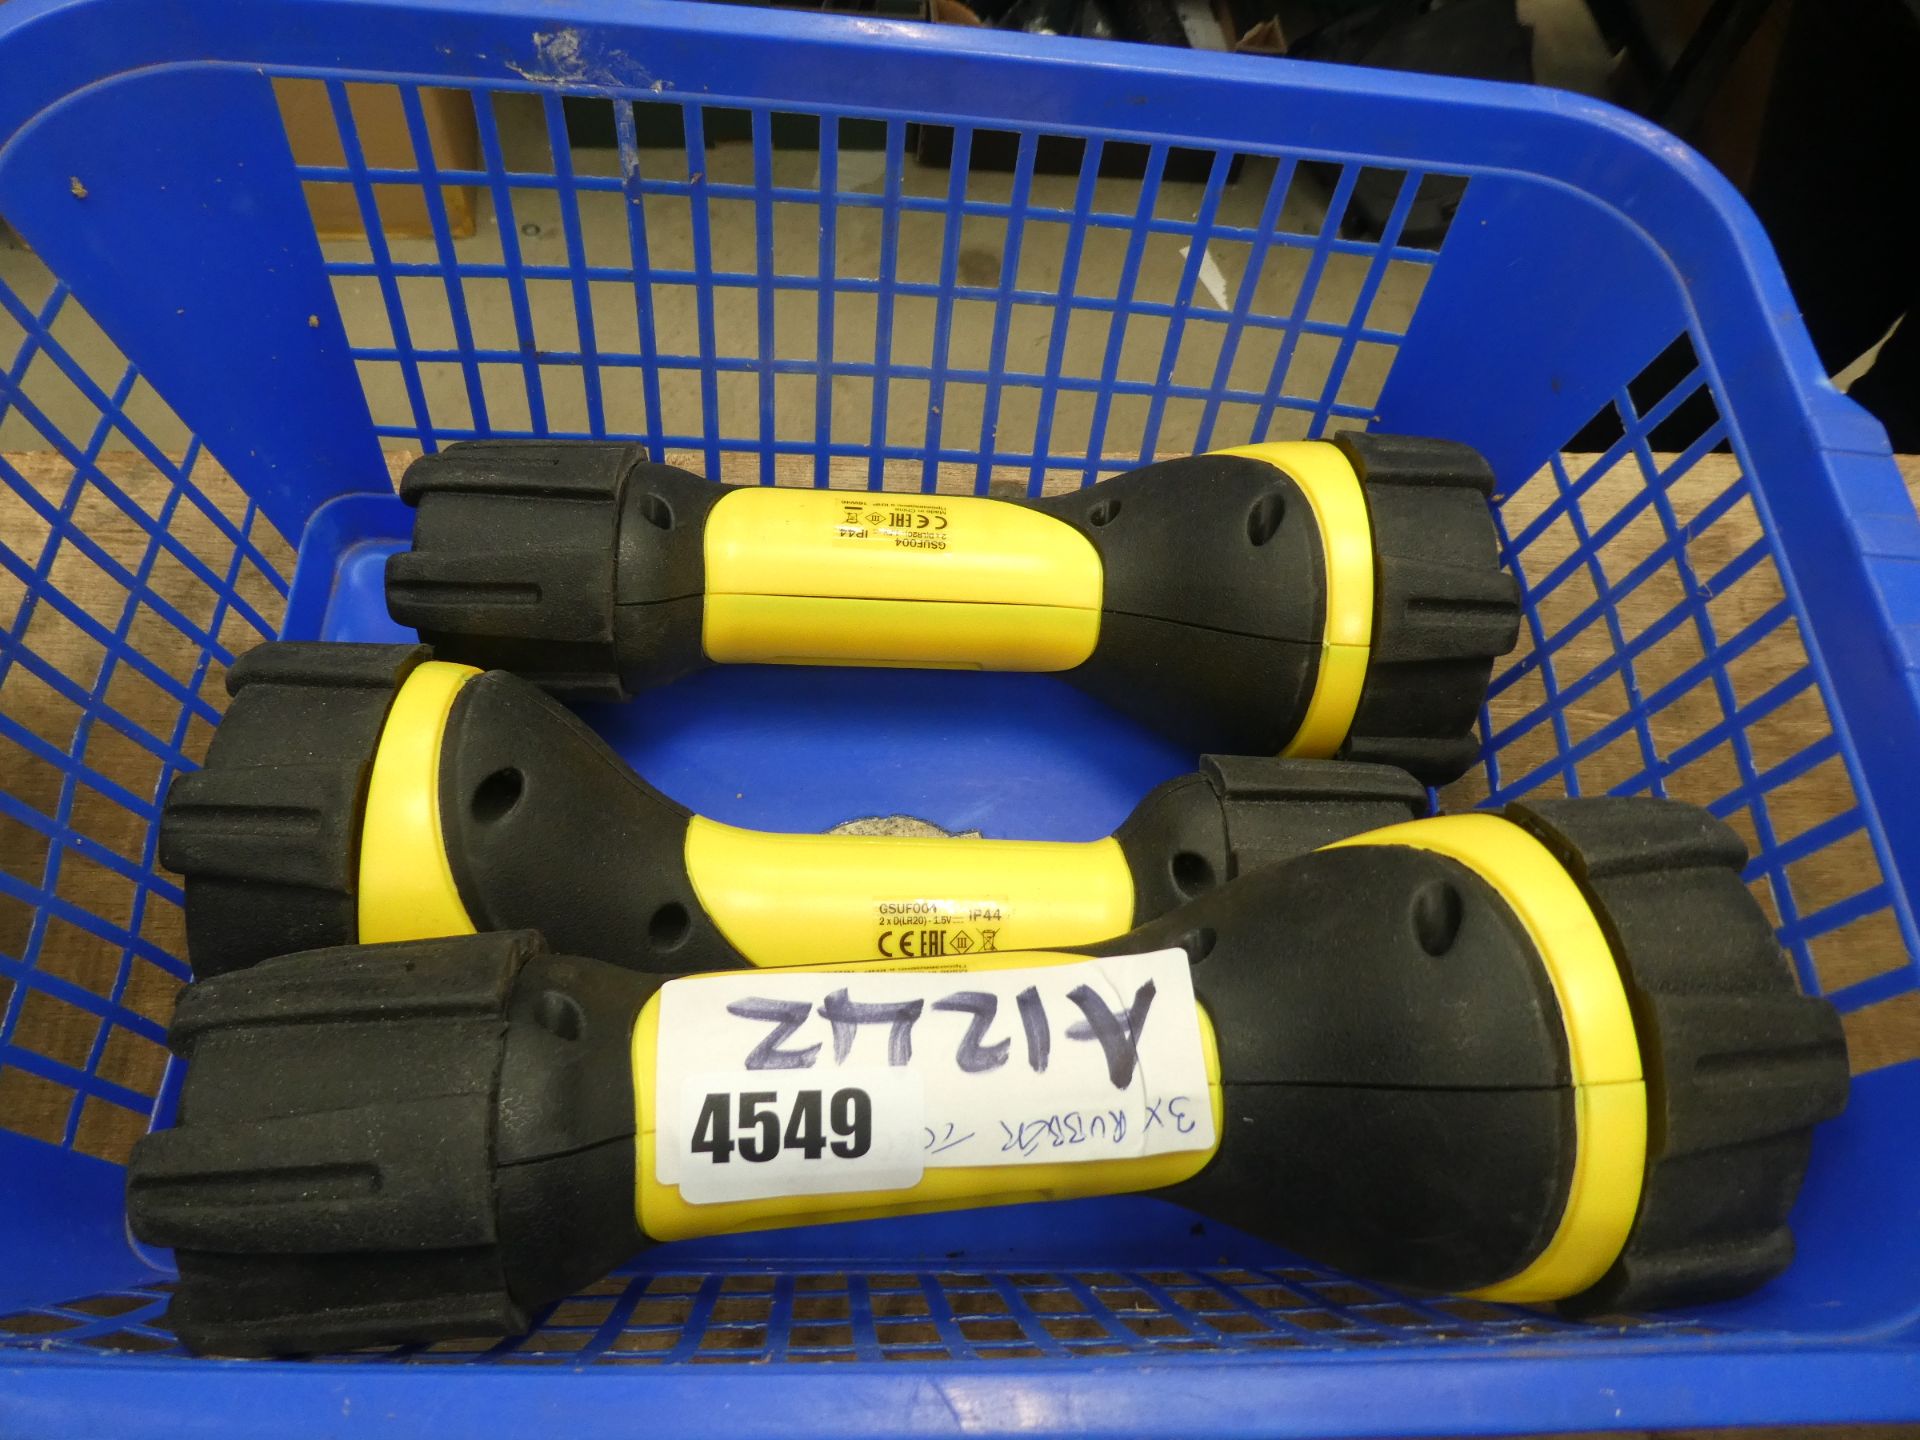 Three rubberized torches